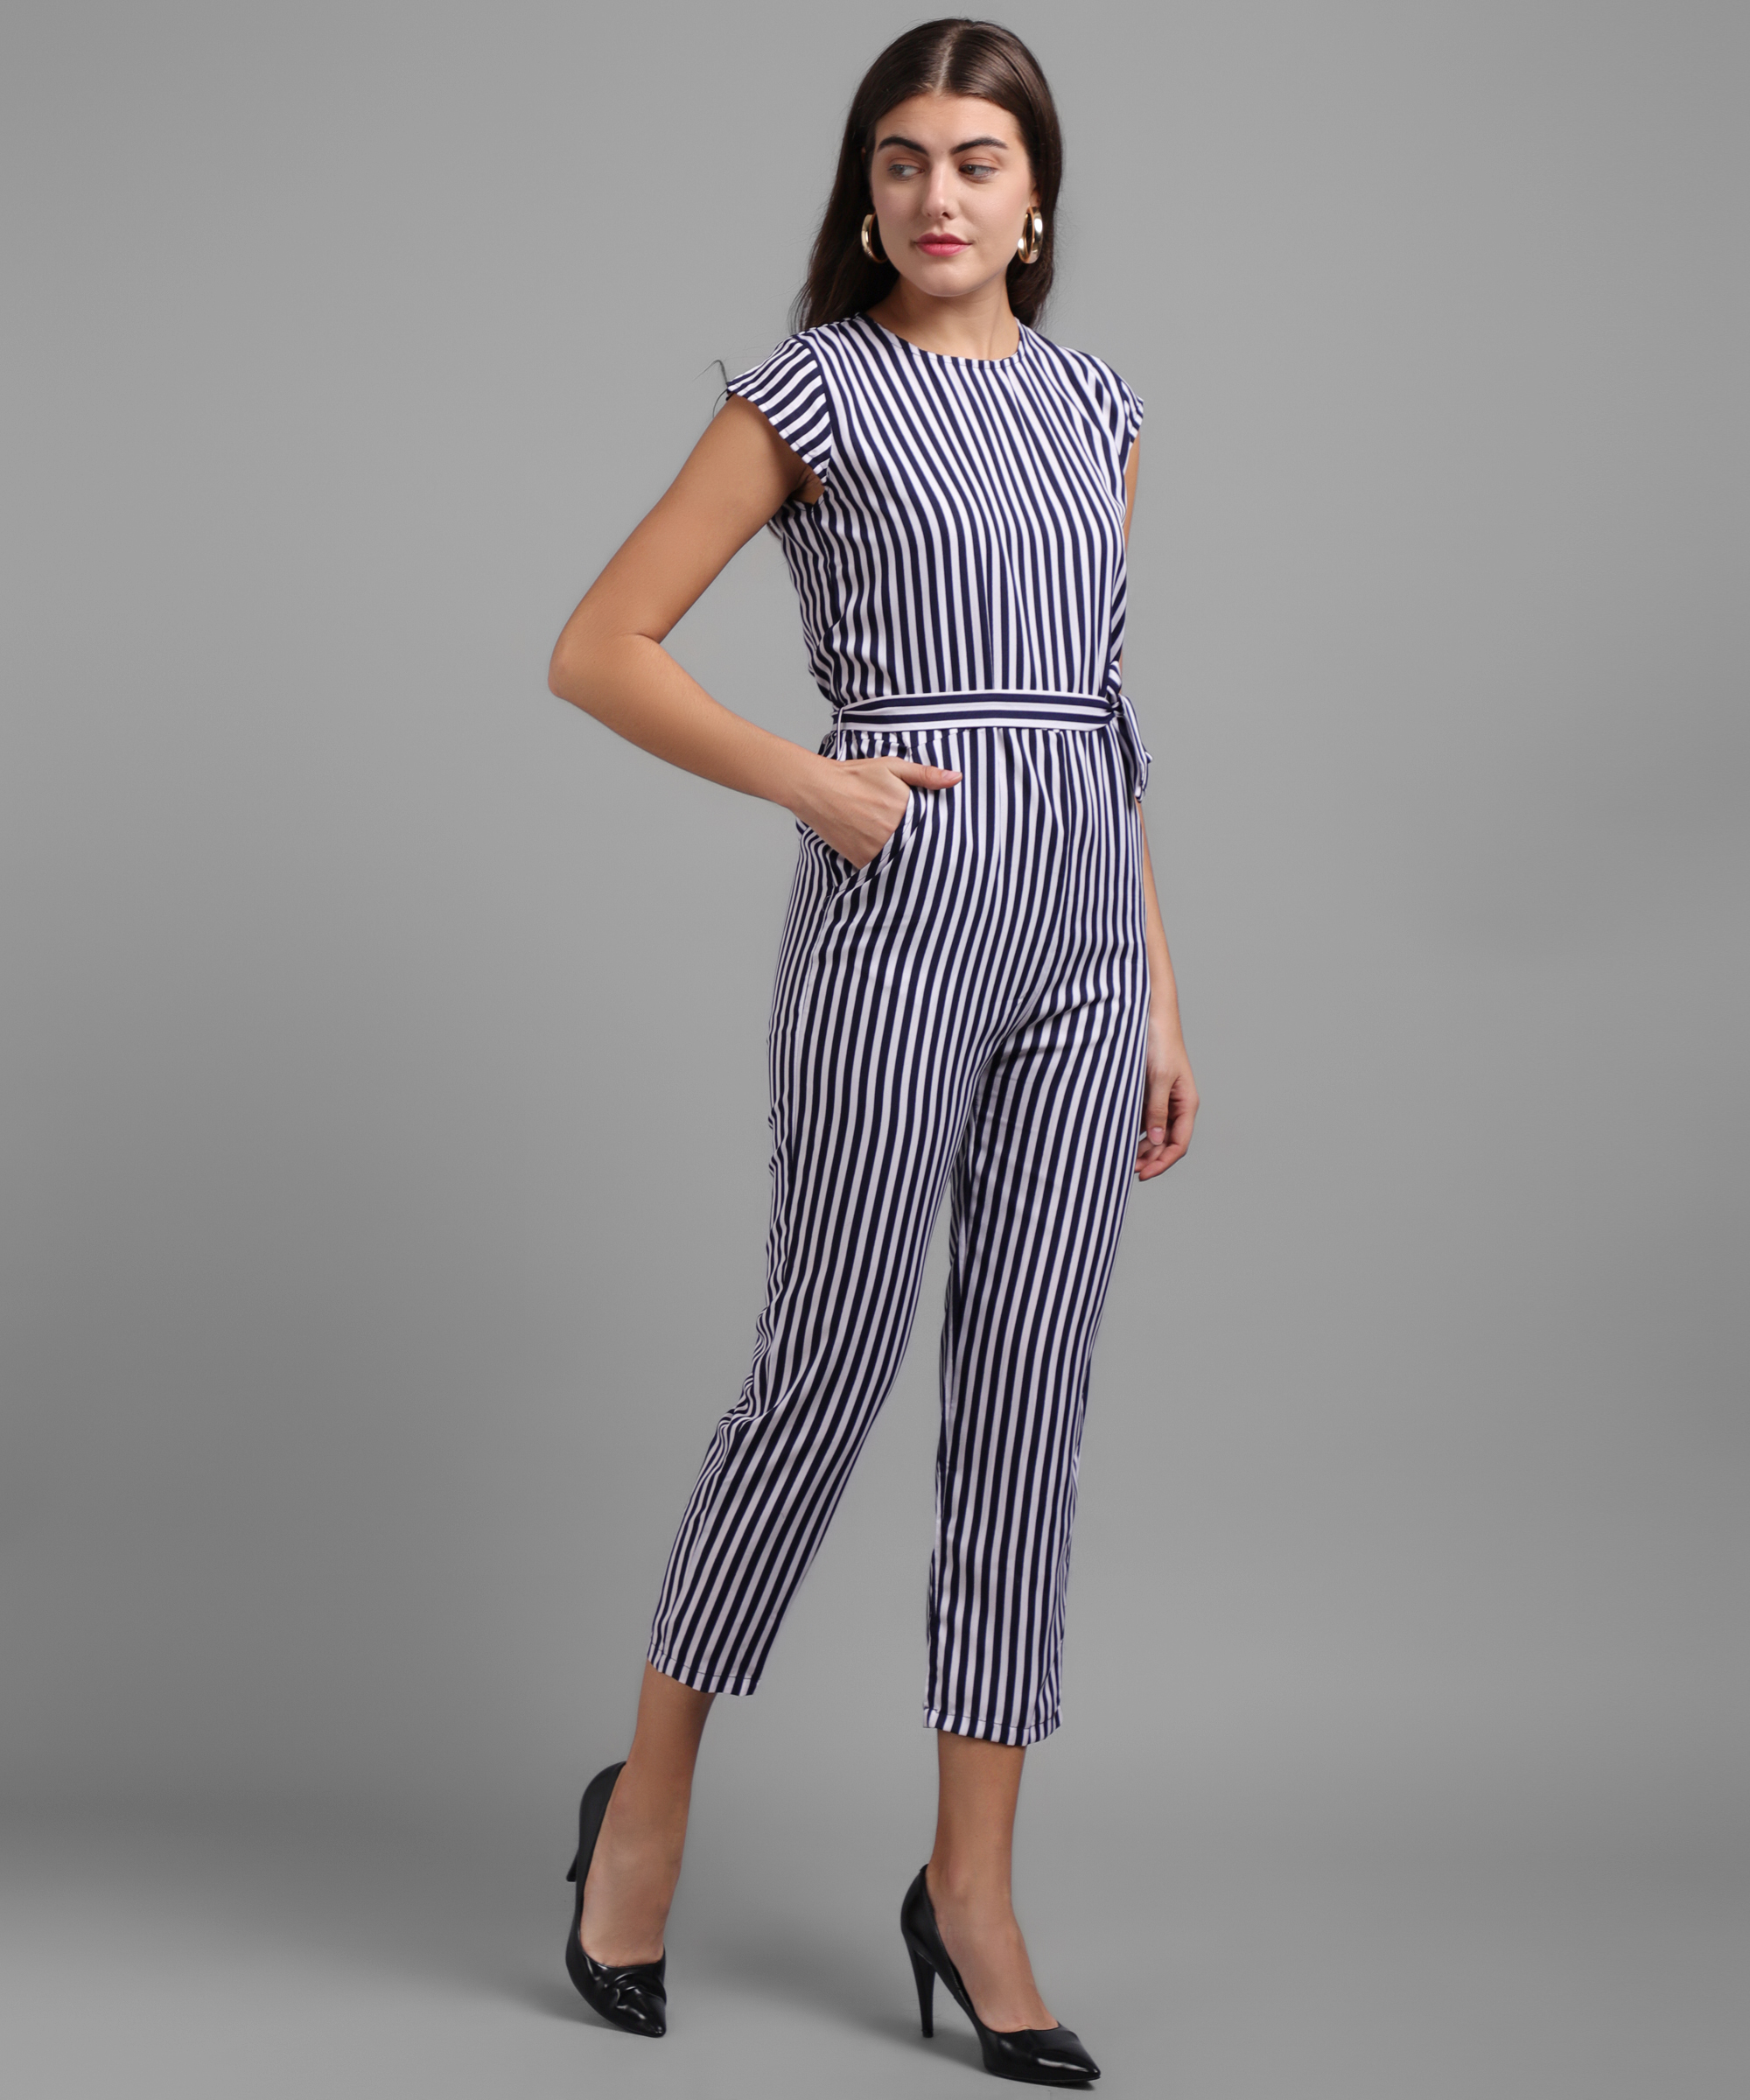 Buy Vivient Women Nevy Blue Small Stripe Printed Front Knot Jumpsuits ...